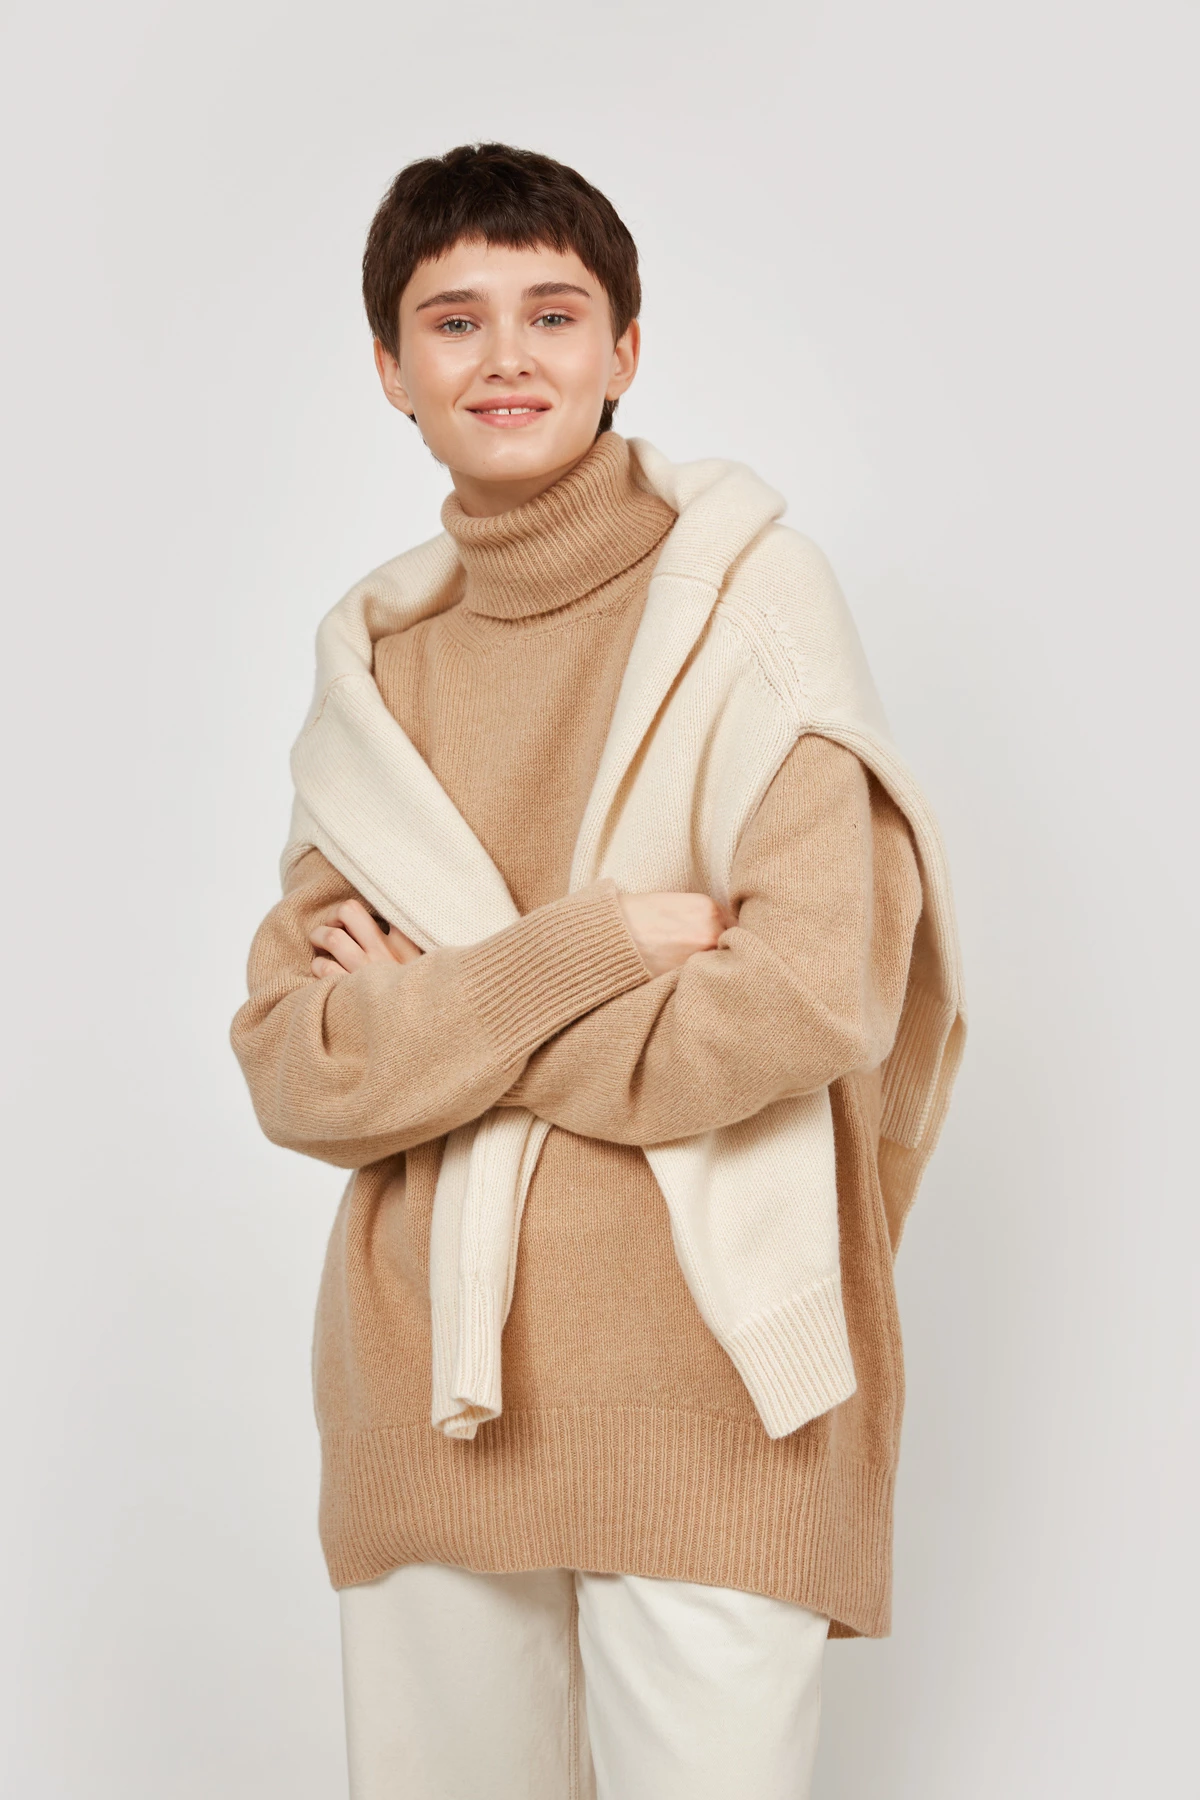 Cashmere beige knitted oversized sweater, photo 7